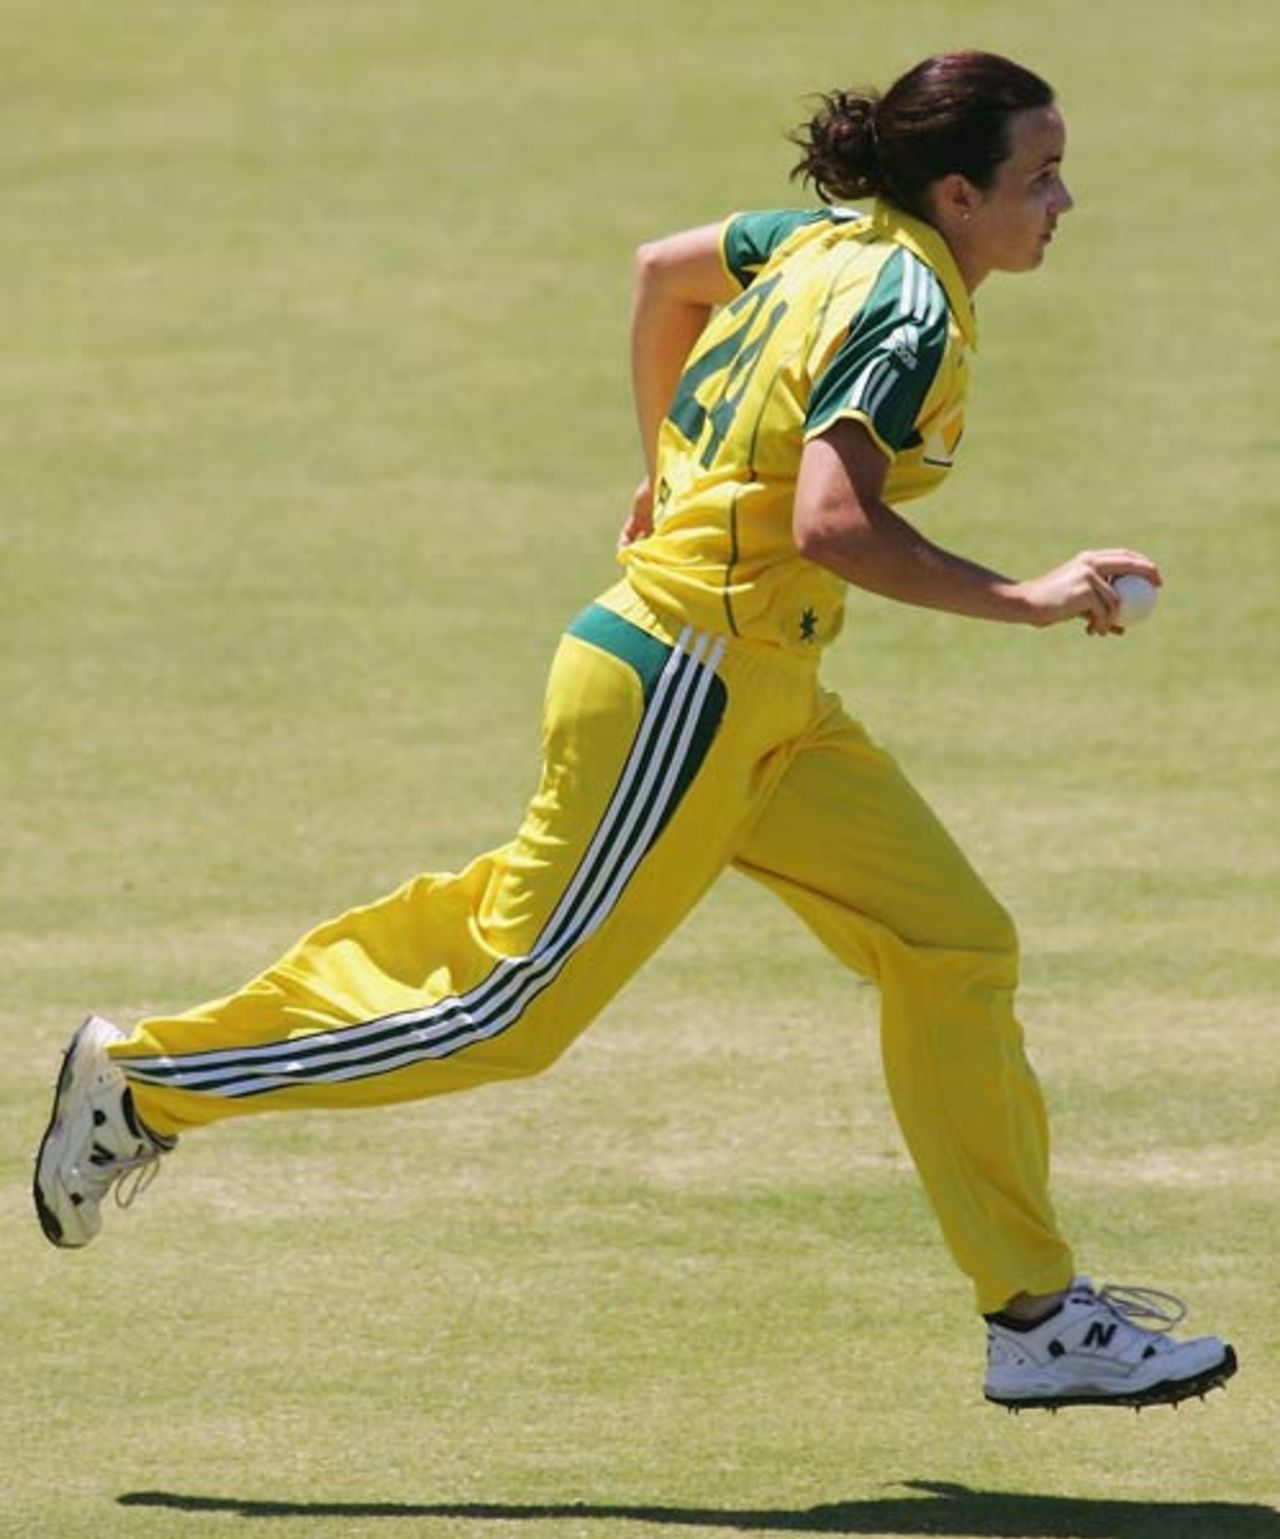 Kirsten Pike took four wickets to restrict New Zealand to 204, Australia v New Zealand, 5th women's ODI, Brisbane, October 28, 2006